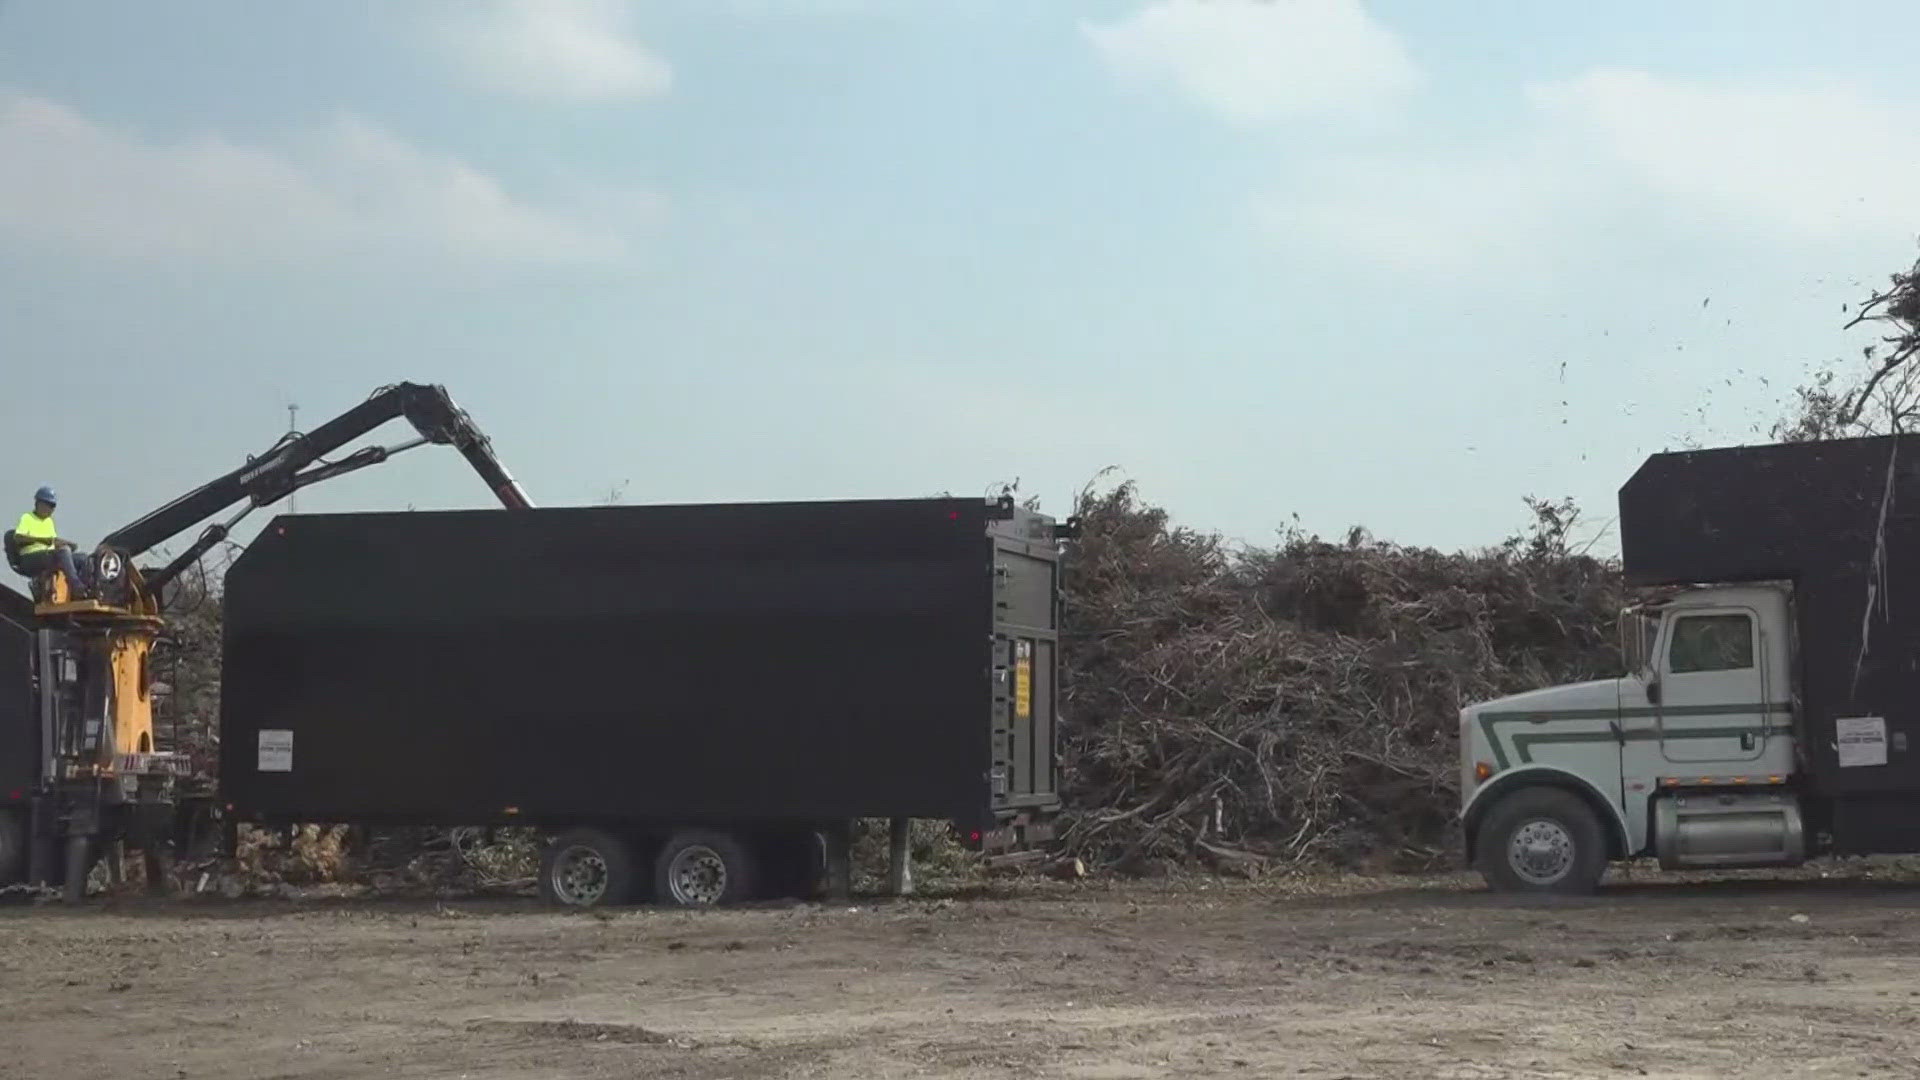 Five-thousand cubic yards of brush has been brought to the City of Temple's landfill.